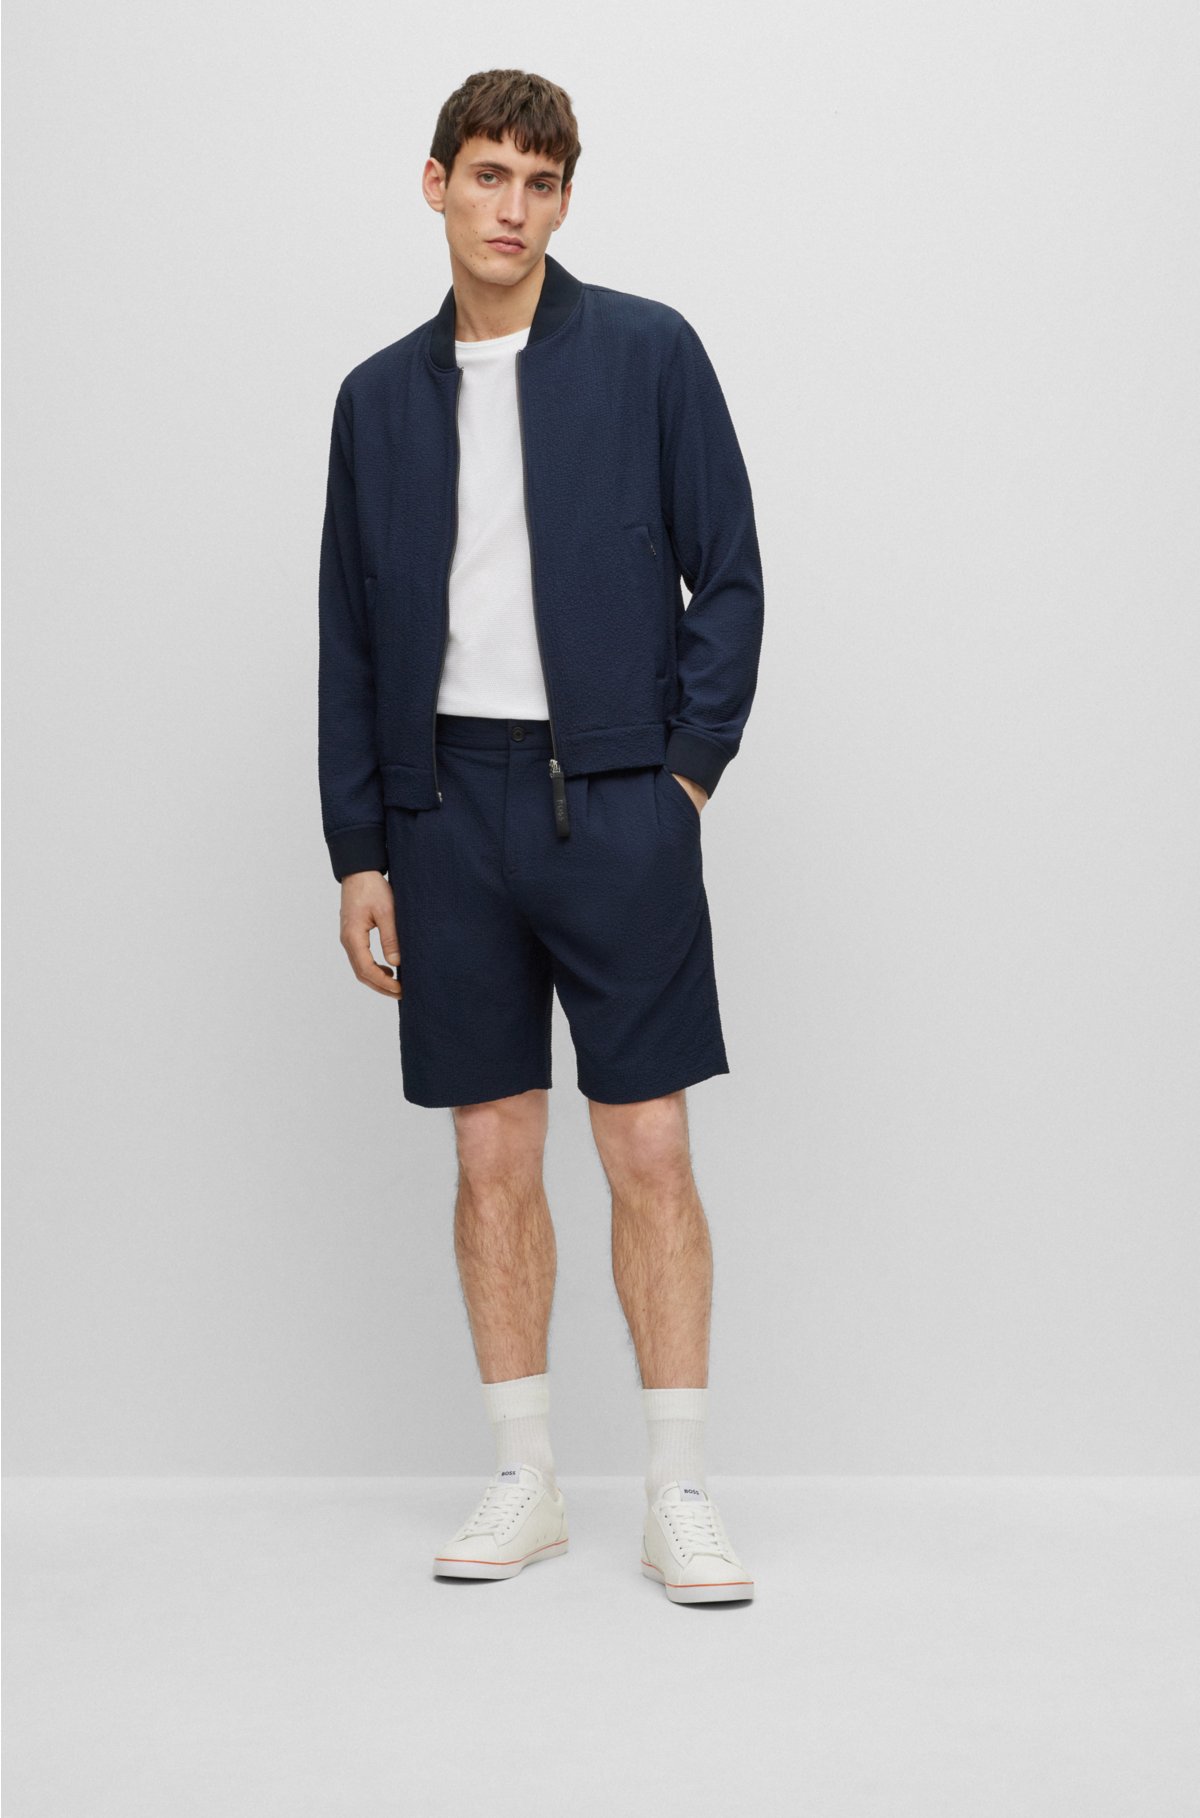 How to Wear A Jacket with Shorts - the gray details